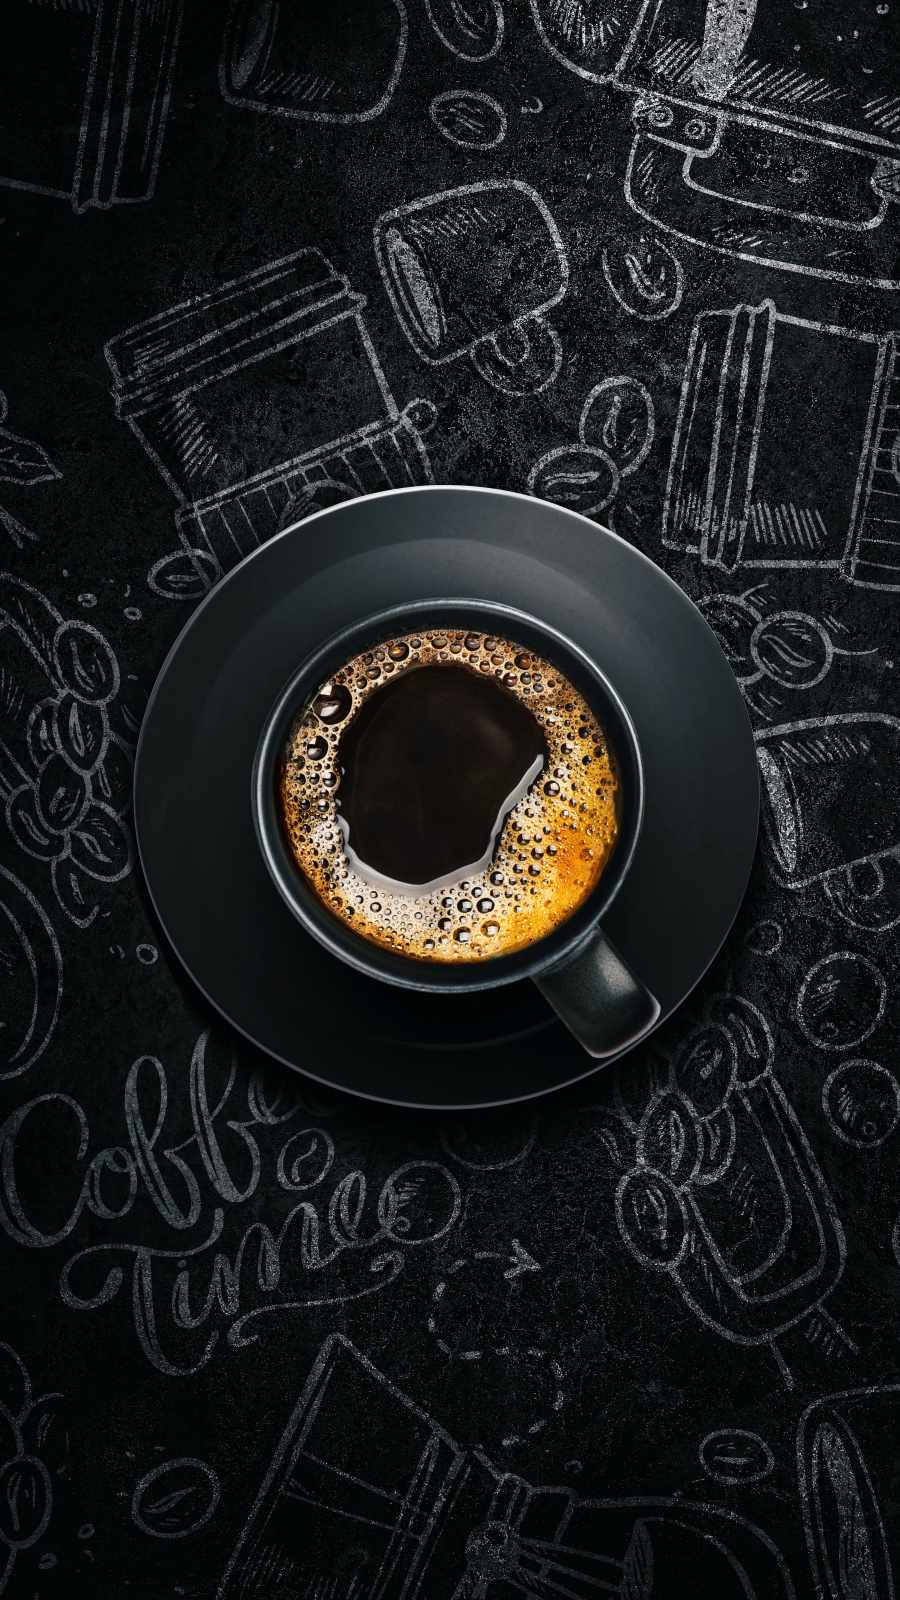 A cup of coffee on a black table with coffee time written on it - Coffee